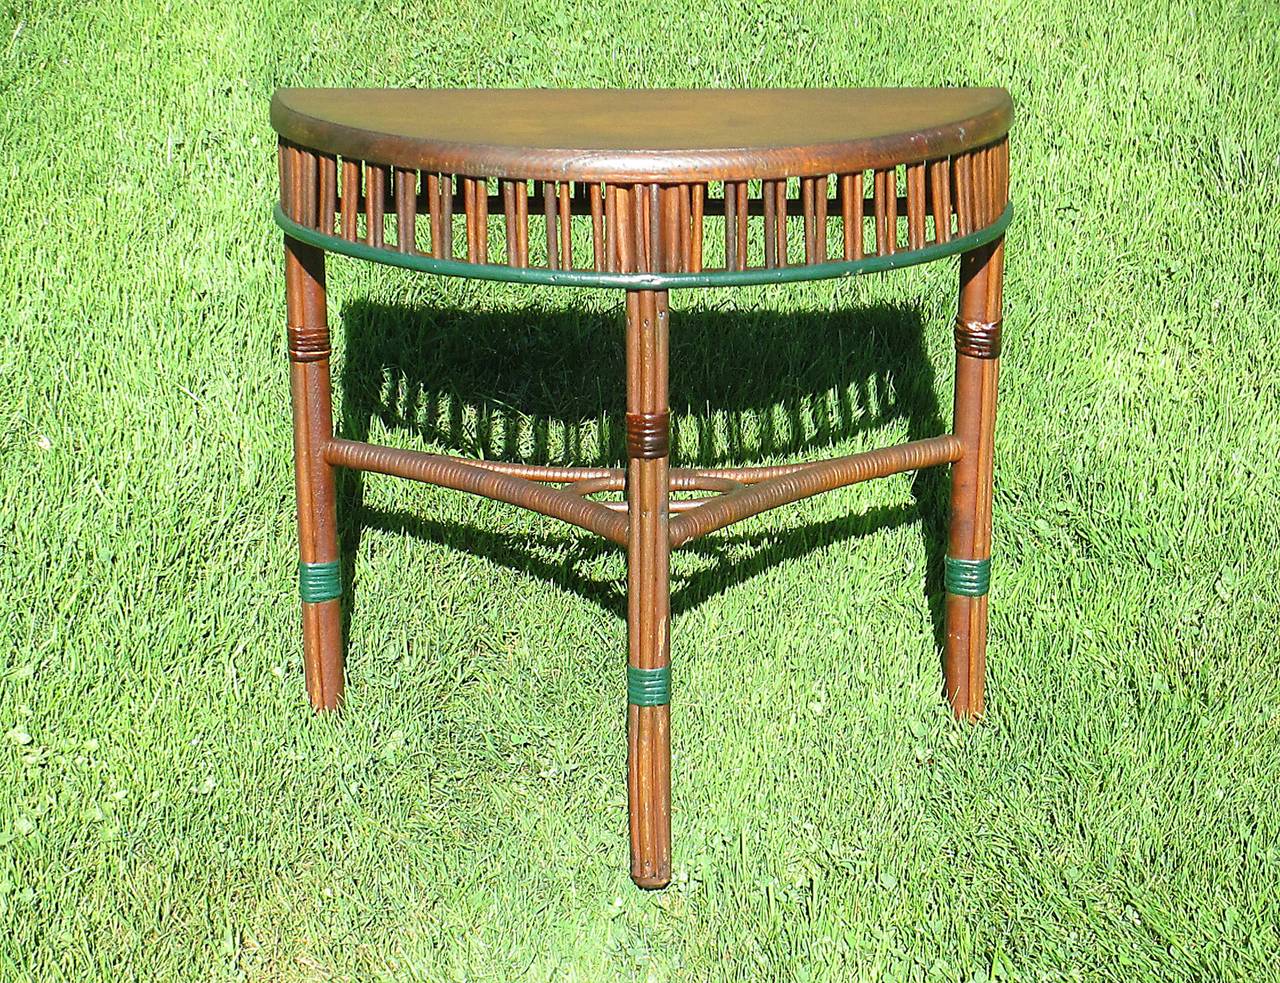 Stick wicker demilune table in natural stained finish with green painted trim. Vertical paired reed apron. Wood top with beveled edge.